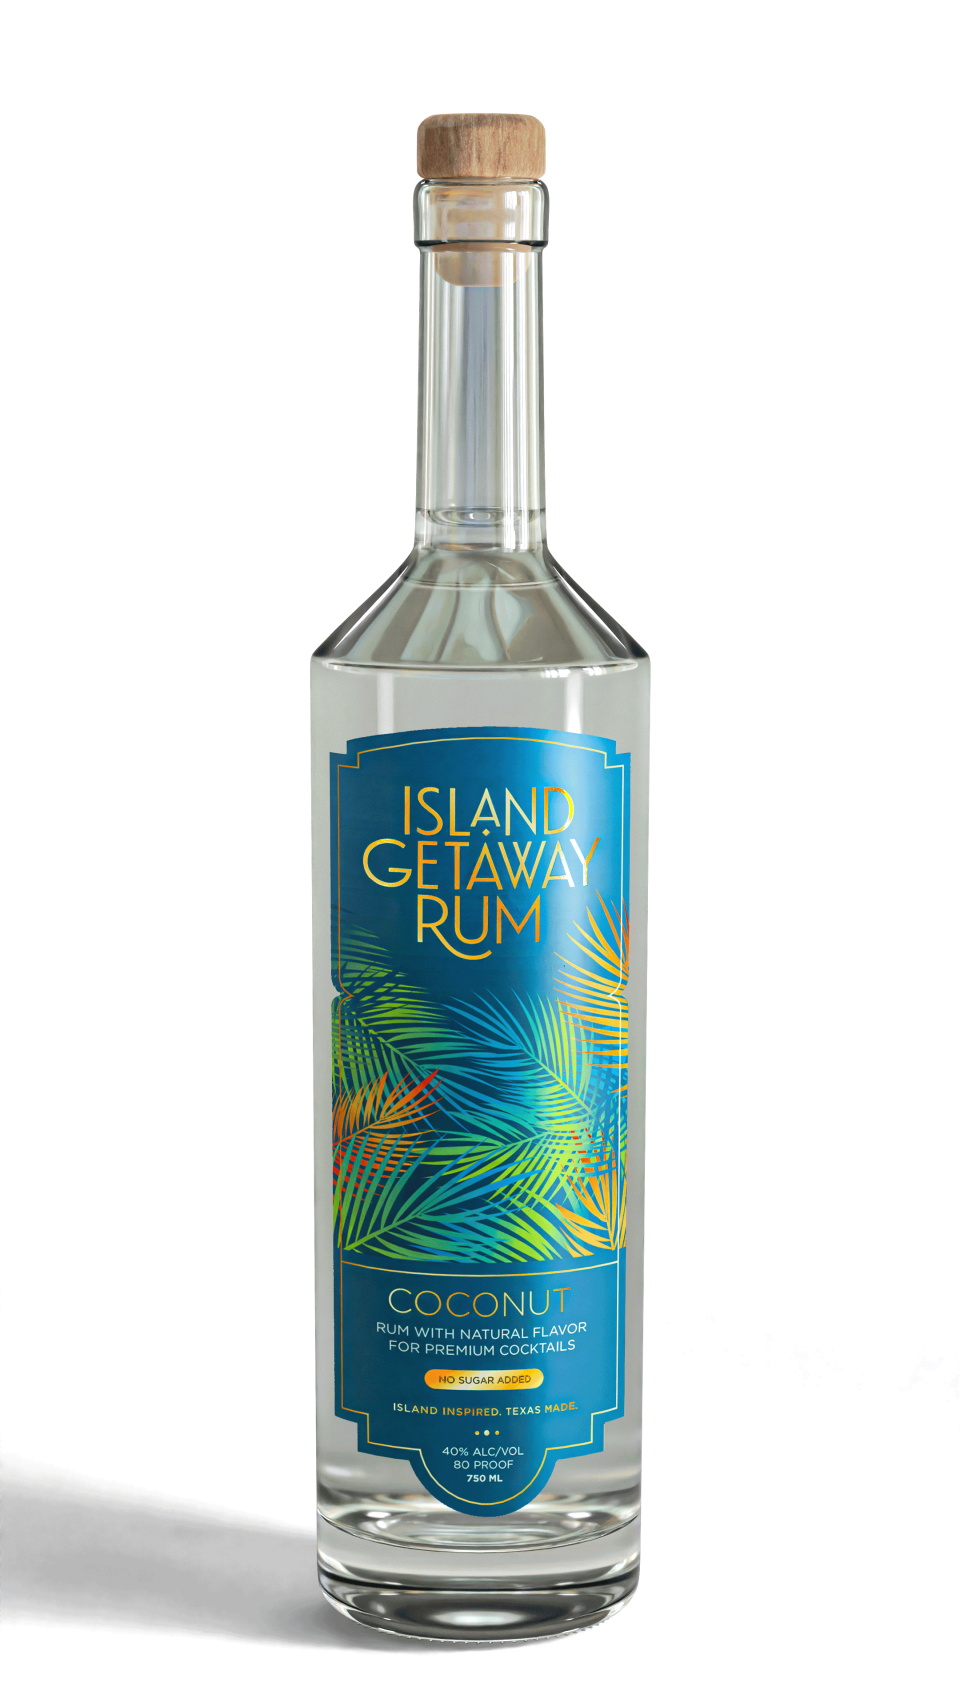 Island Getaway Rum is one of only two female Hispanic-owned distilleries registered with the Texas Distilled Spirits Association, according to Stephanie Houston.